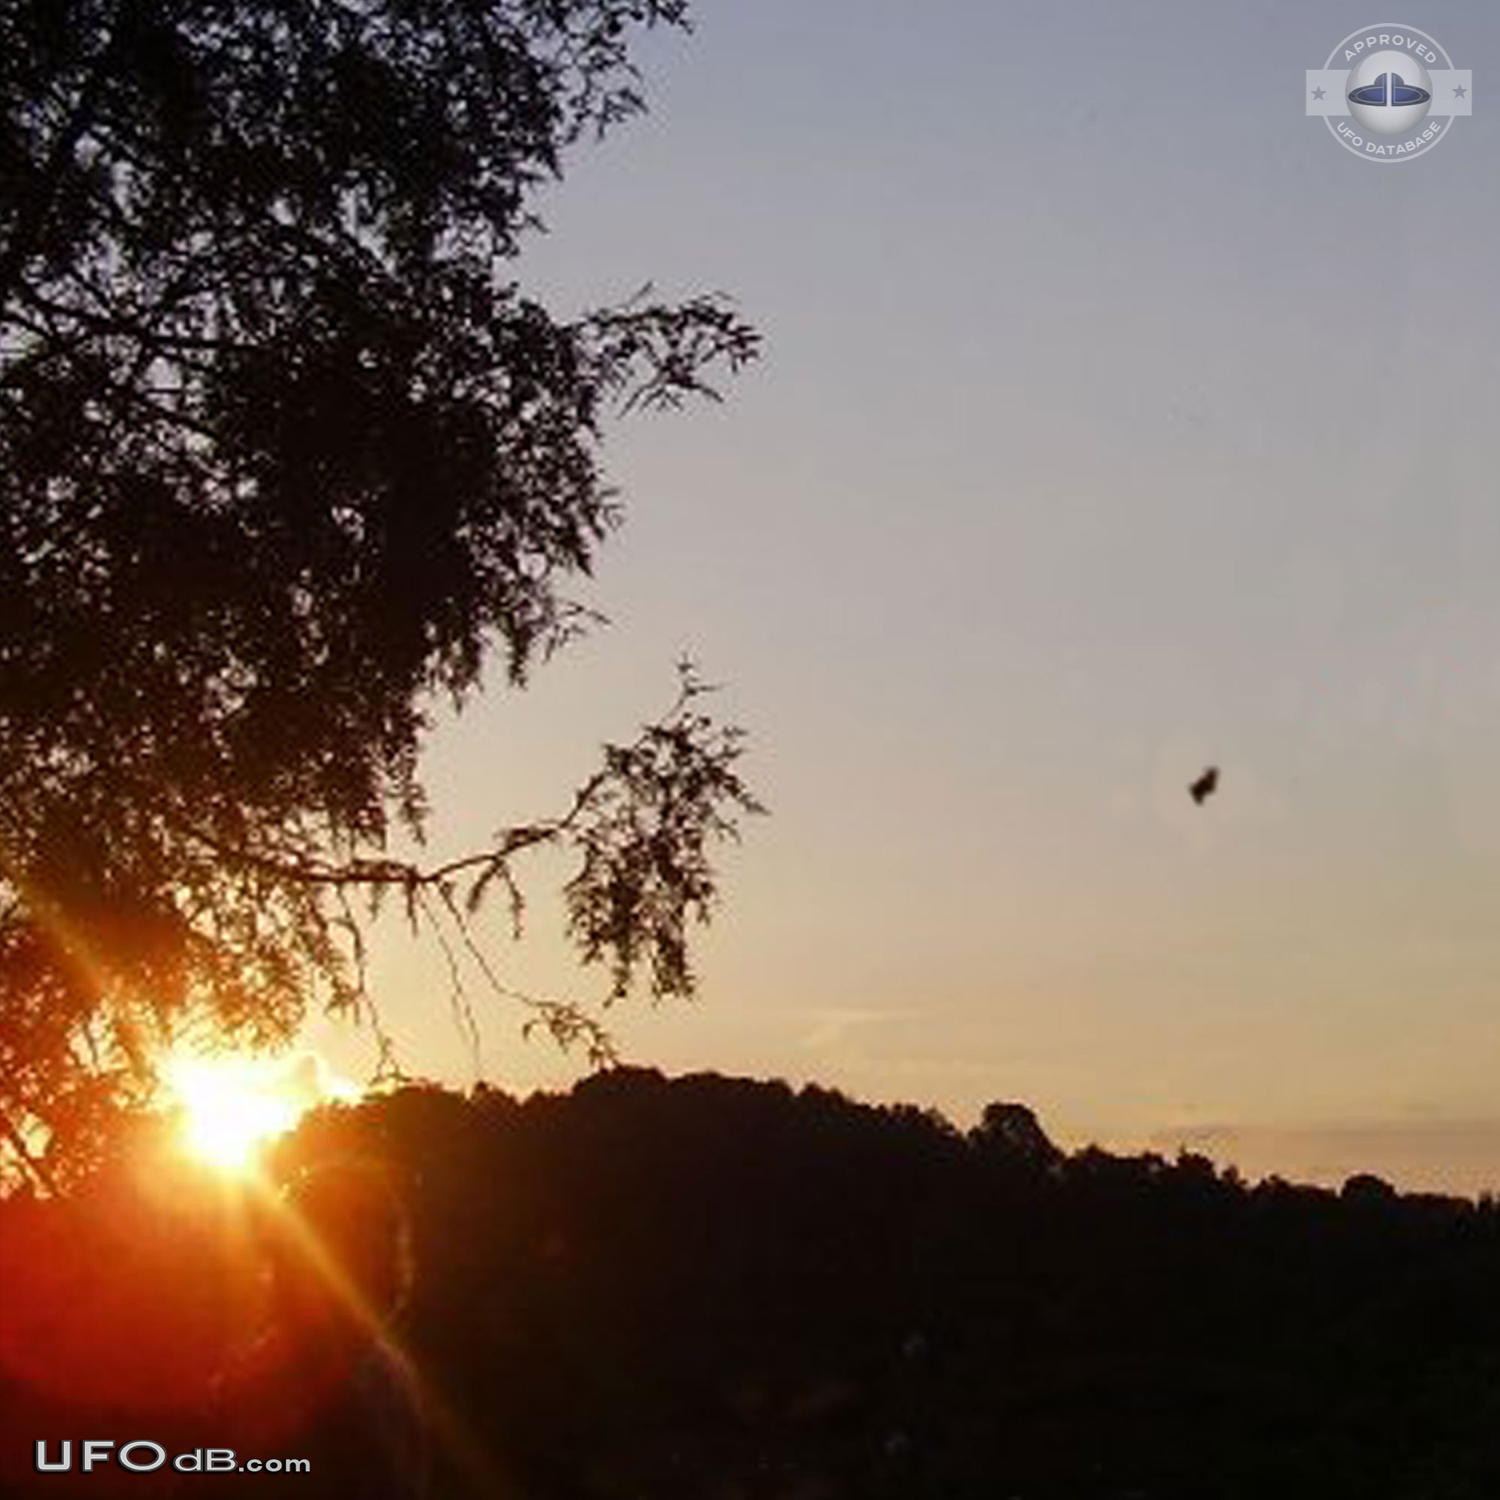 Bright metallic UFO caught on picture over Nasice, Croatia in May 2008 UFO Picture #471-1